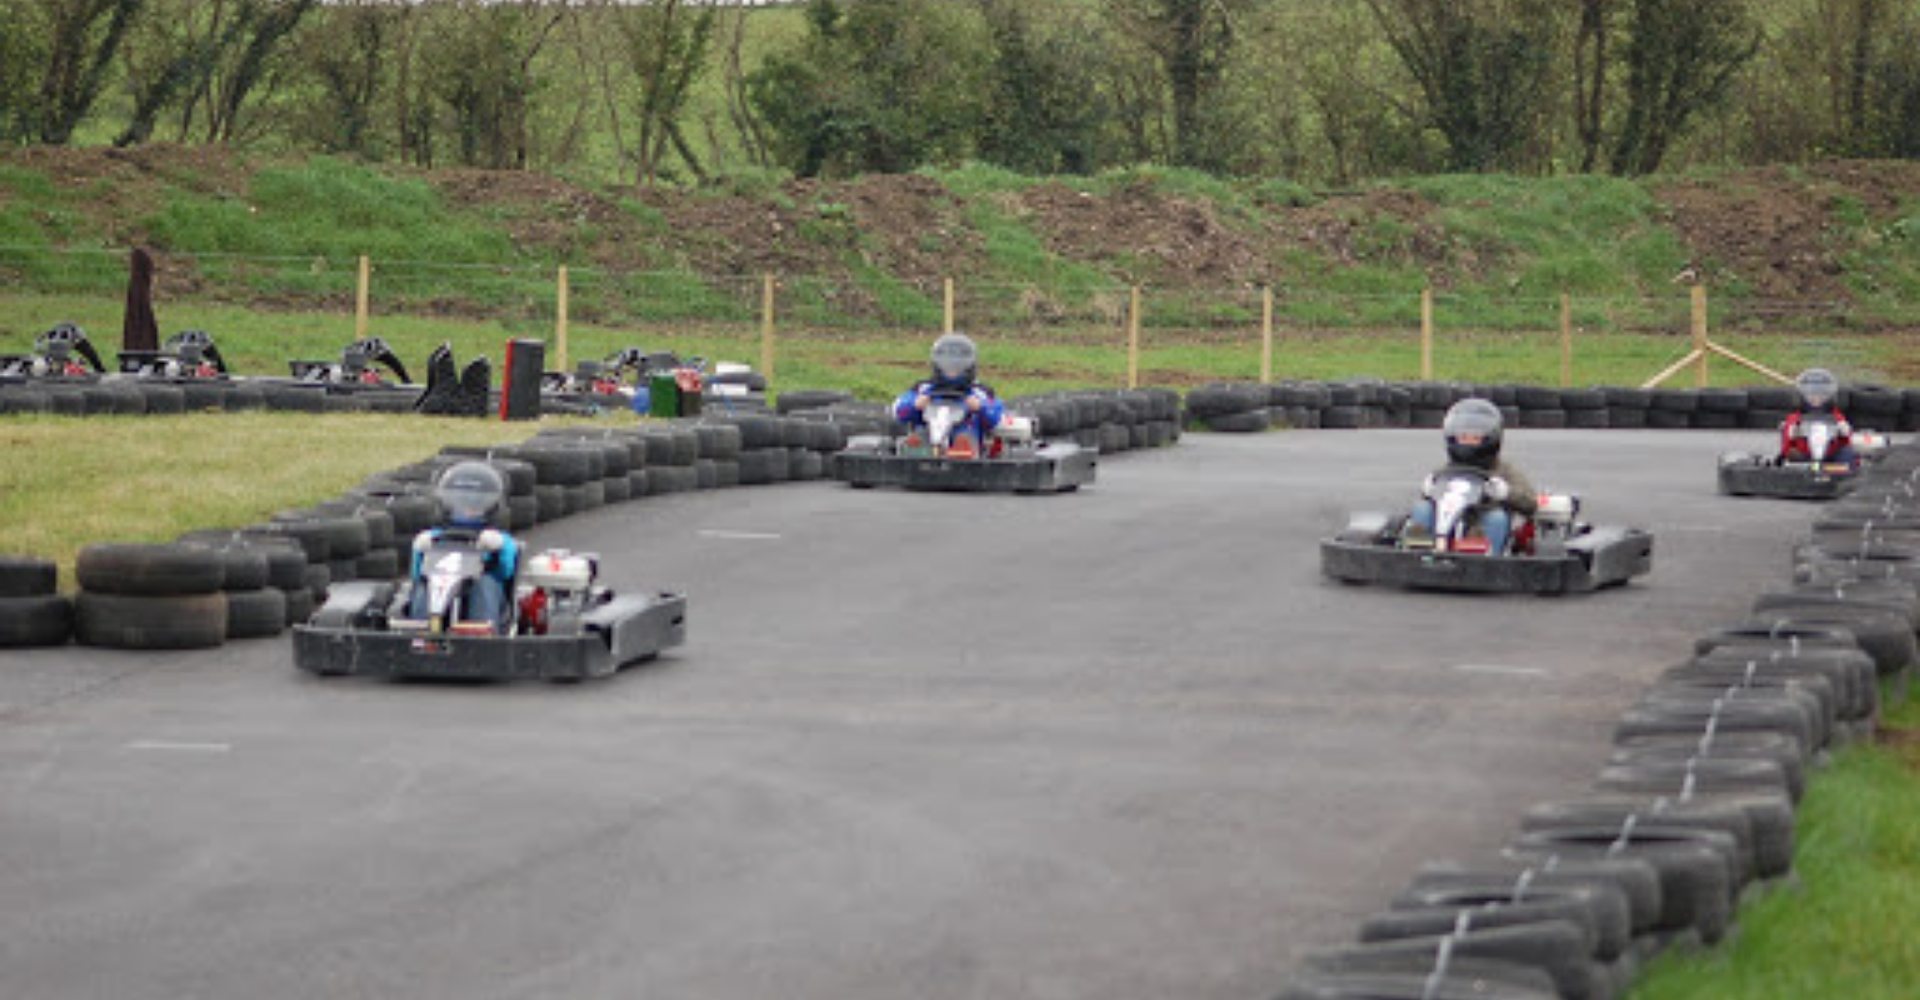 Go Karting - Staycation in Fermanagh